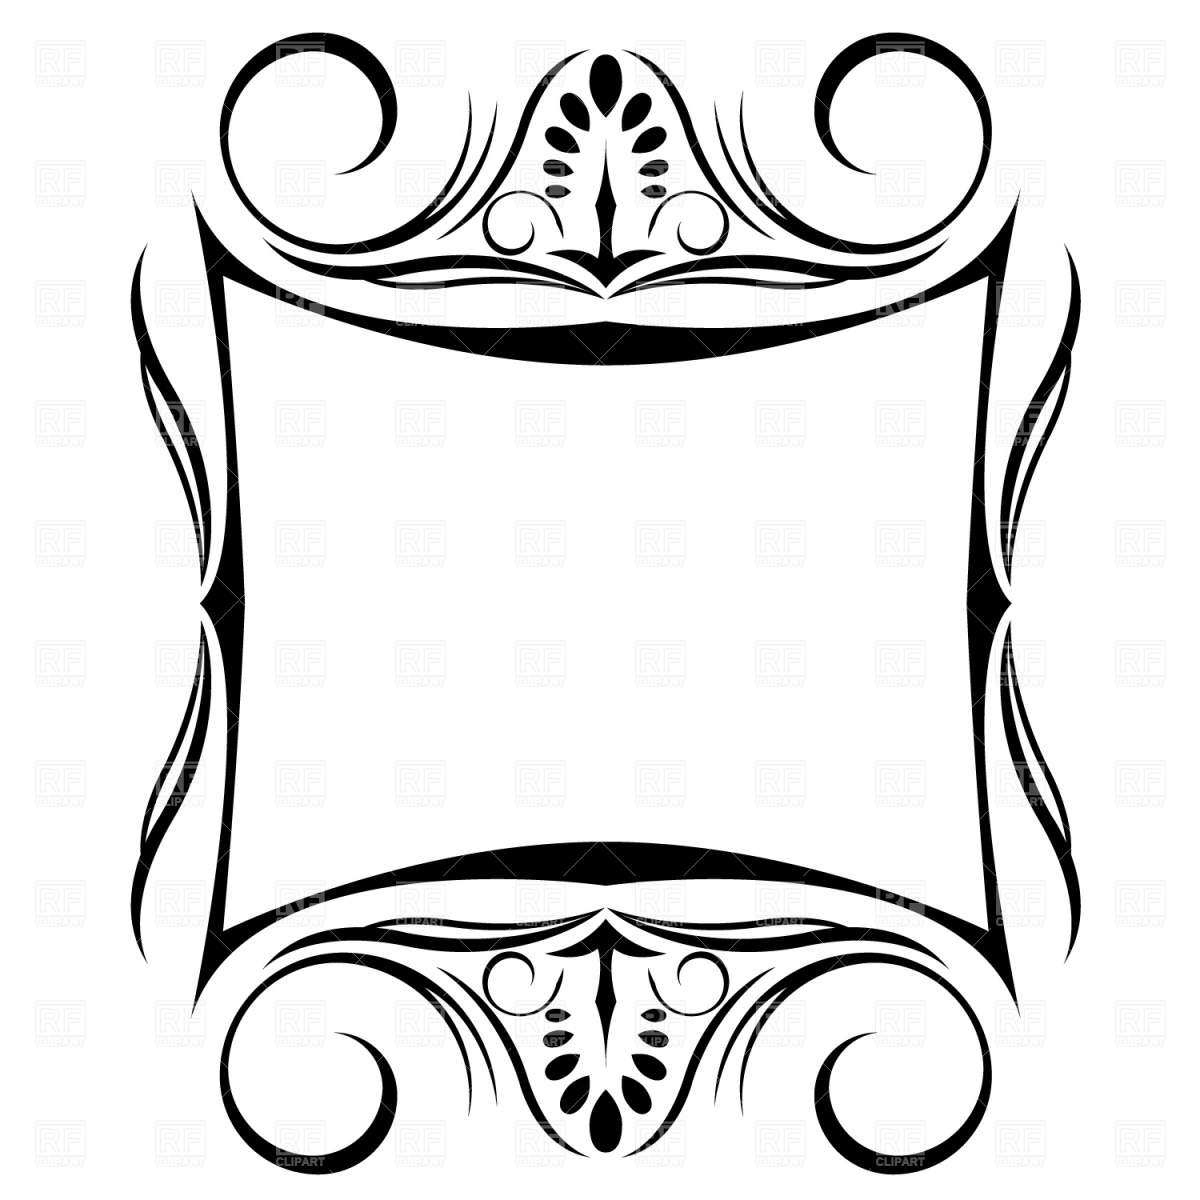 Decorative Frame 1221 Borders And Frames Download Royalty Free